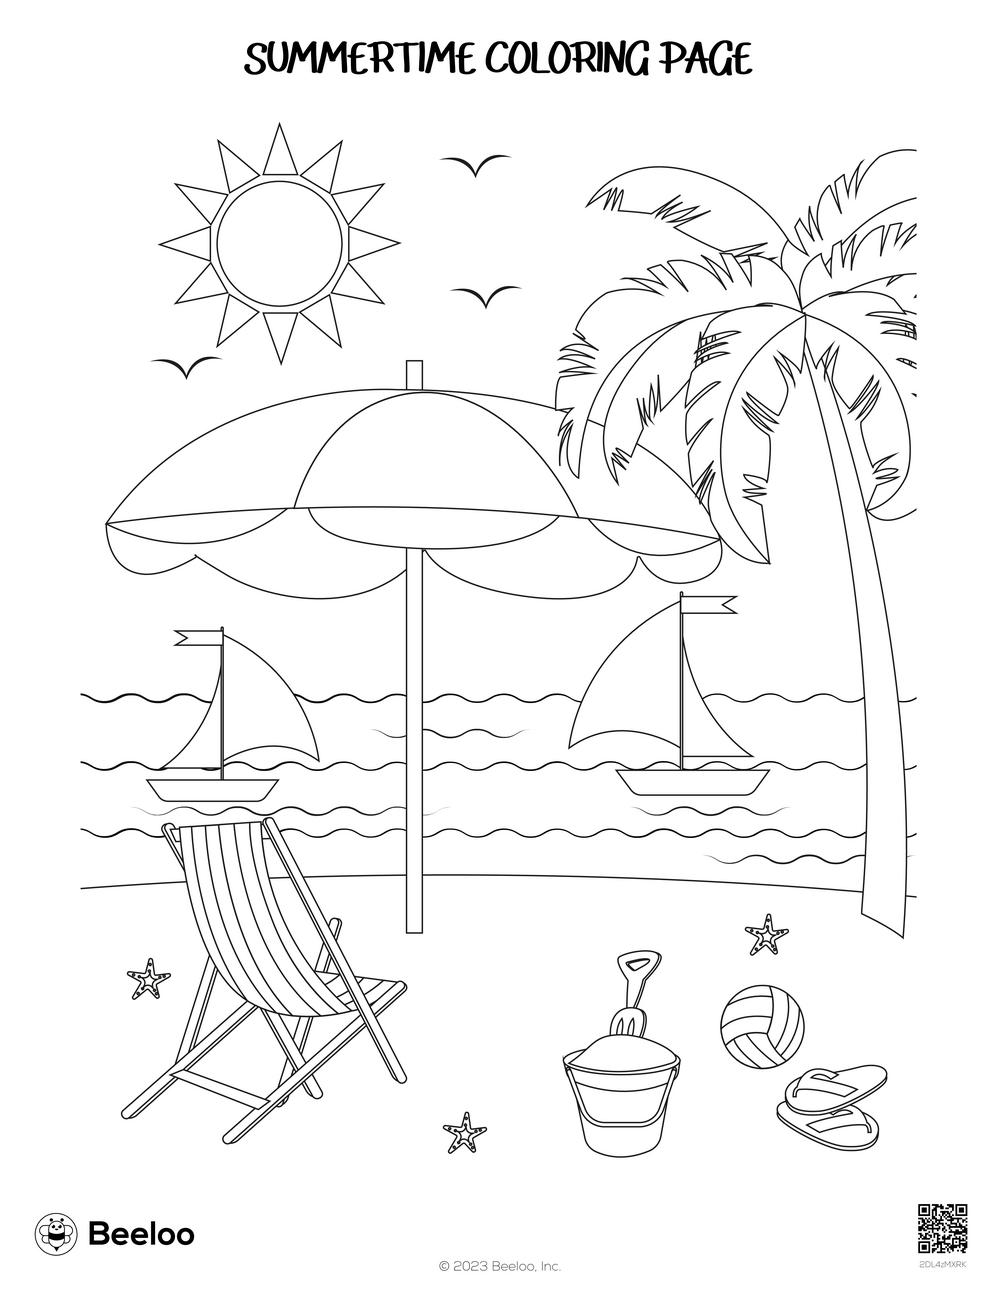 Summertime coloring page â printable crafts and activities for kids